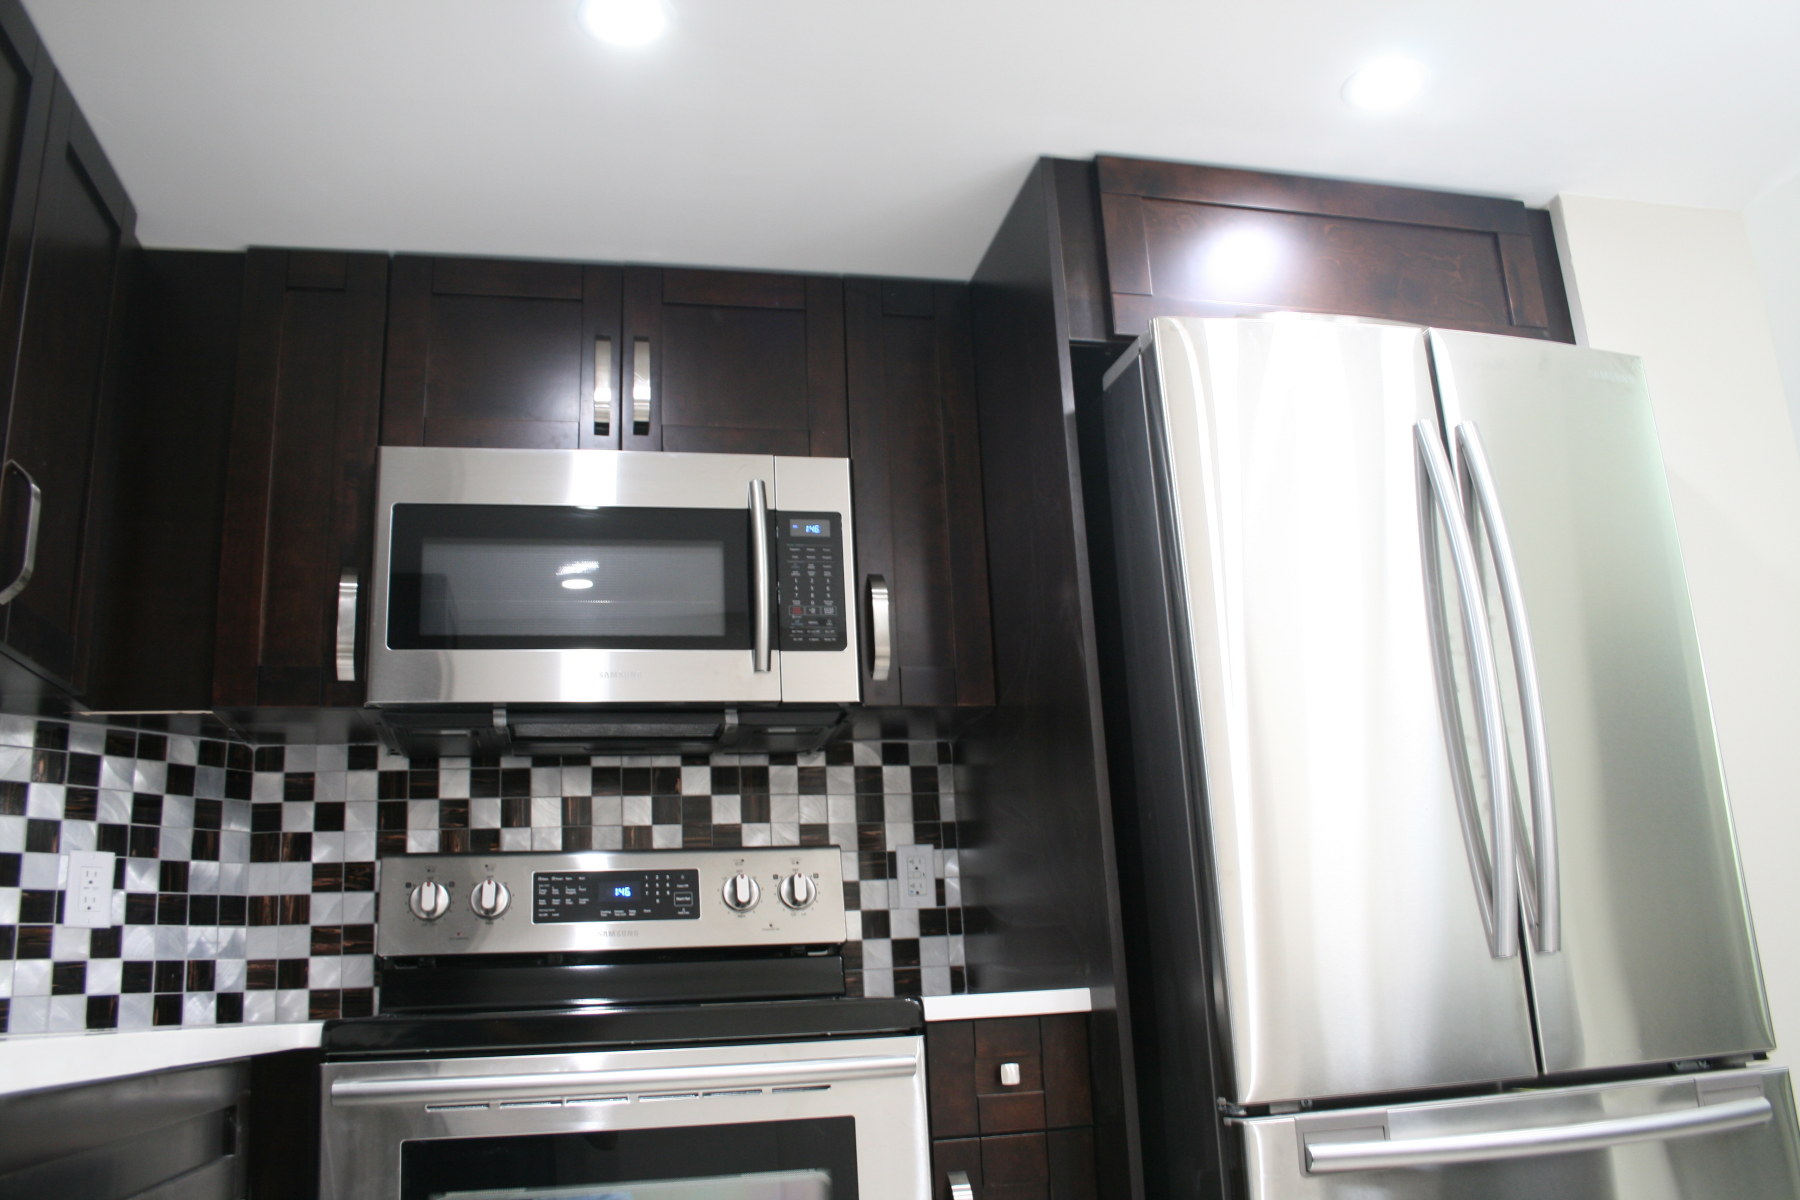 Shaker Kitchen Cabinets & Stainless Steel Appliances